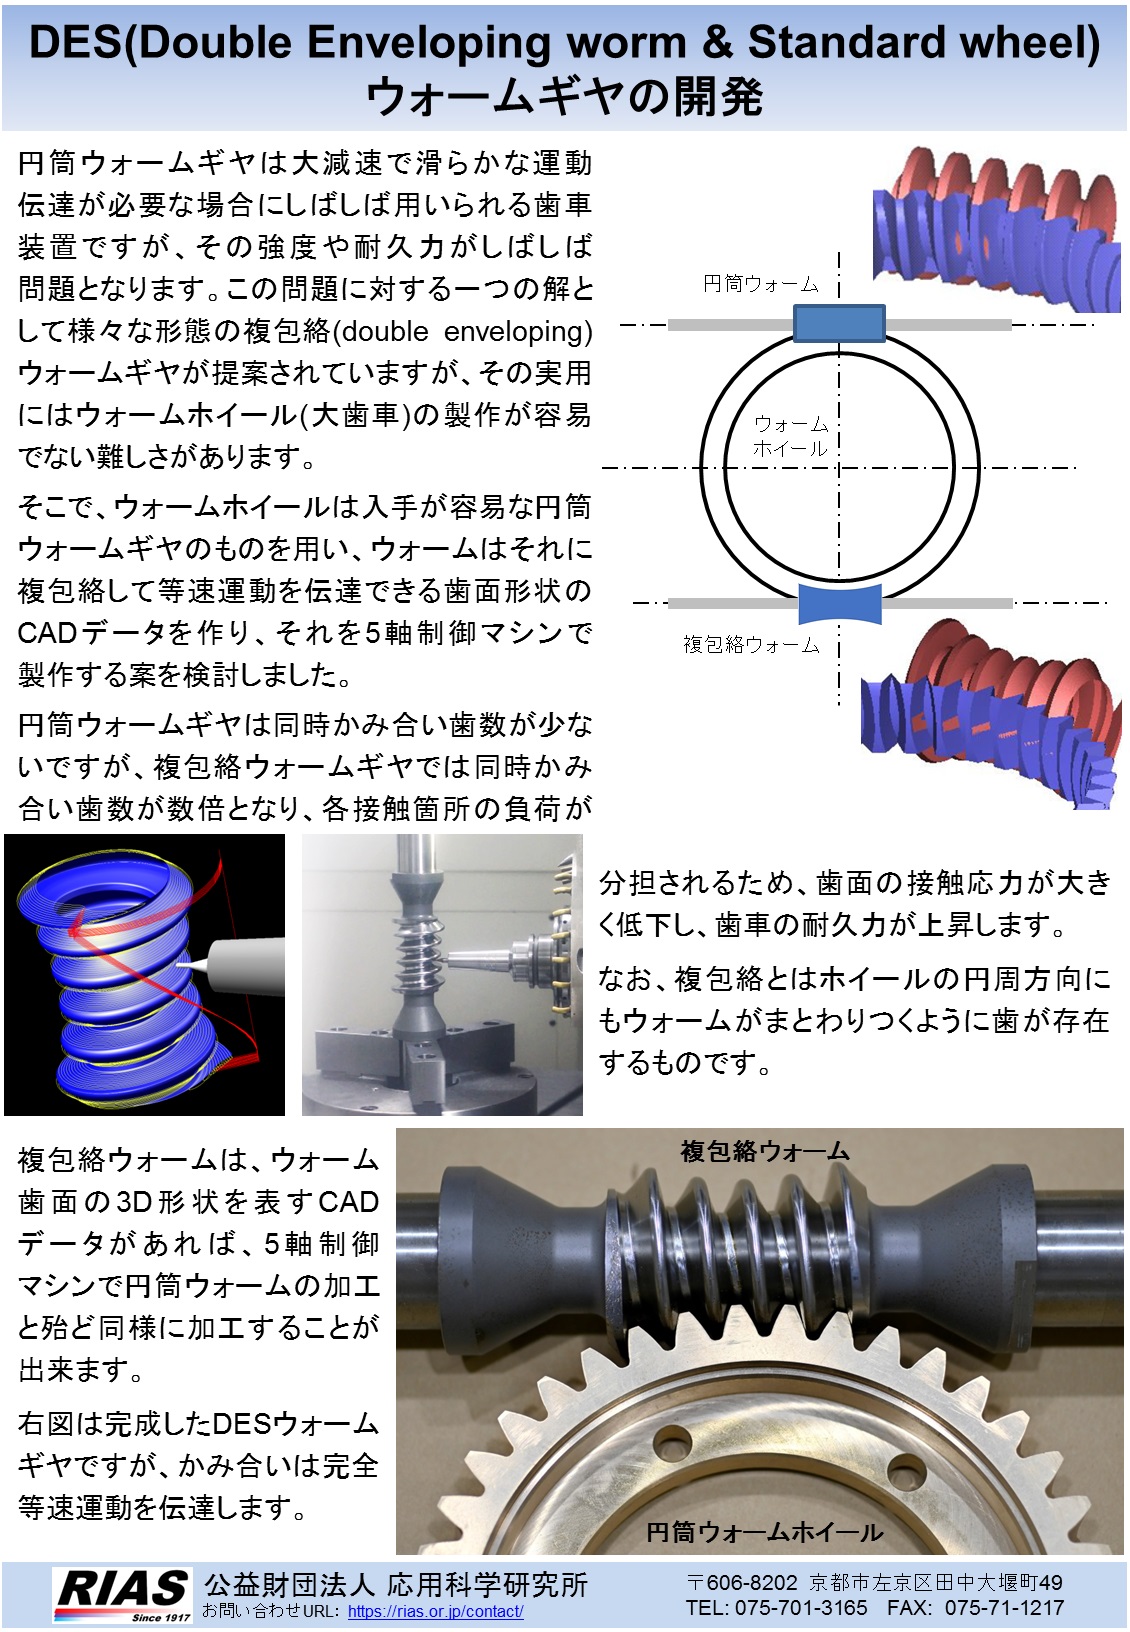 DES(Double Enveloping worm & Standard wheel)ウォームギヤの開発